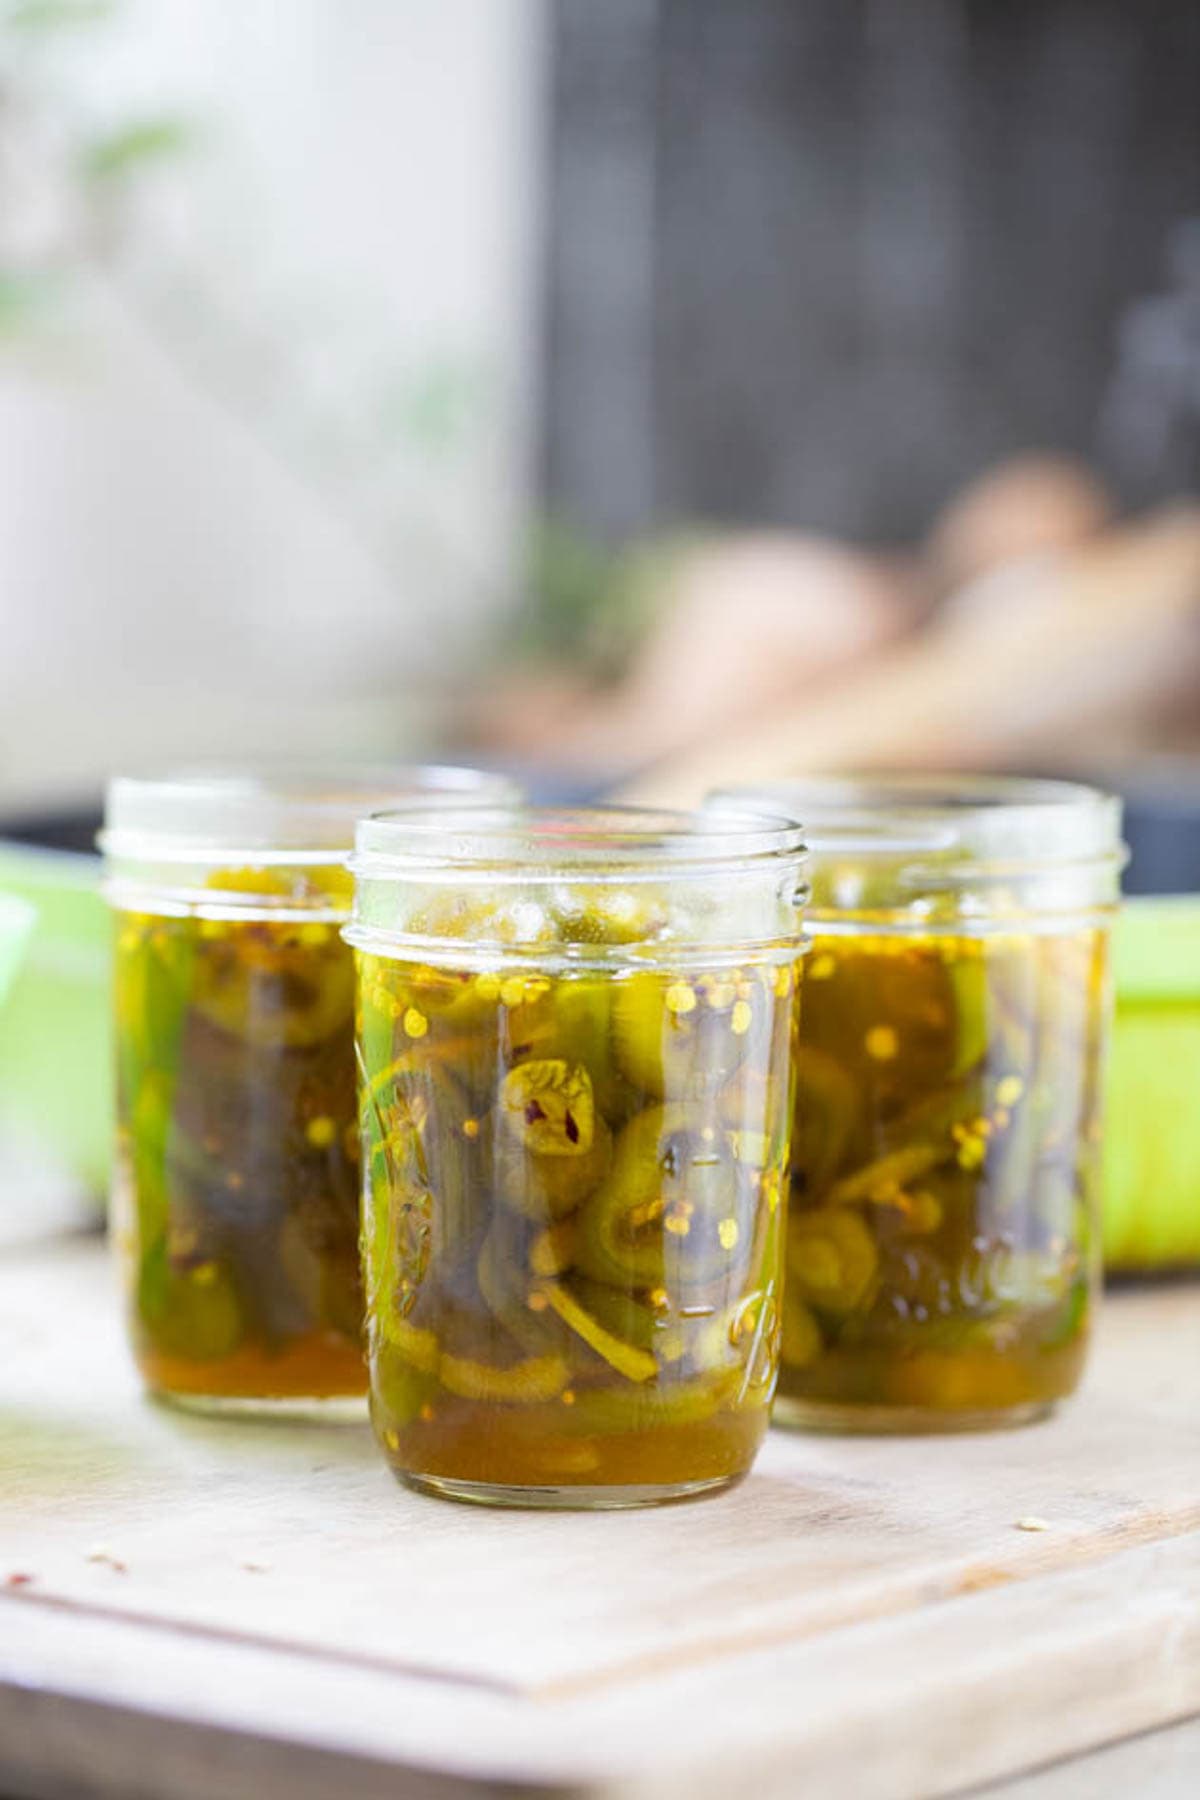 packing the jars with the candied jalapenos